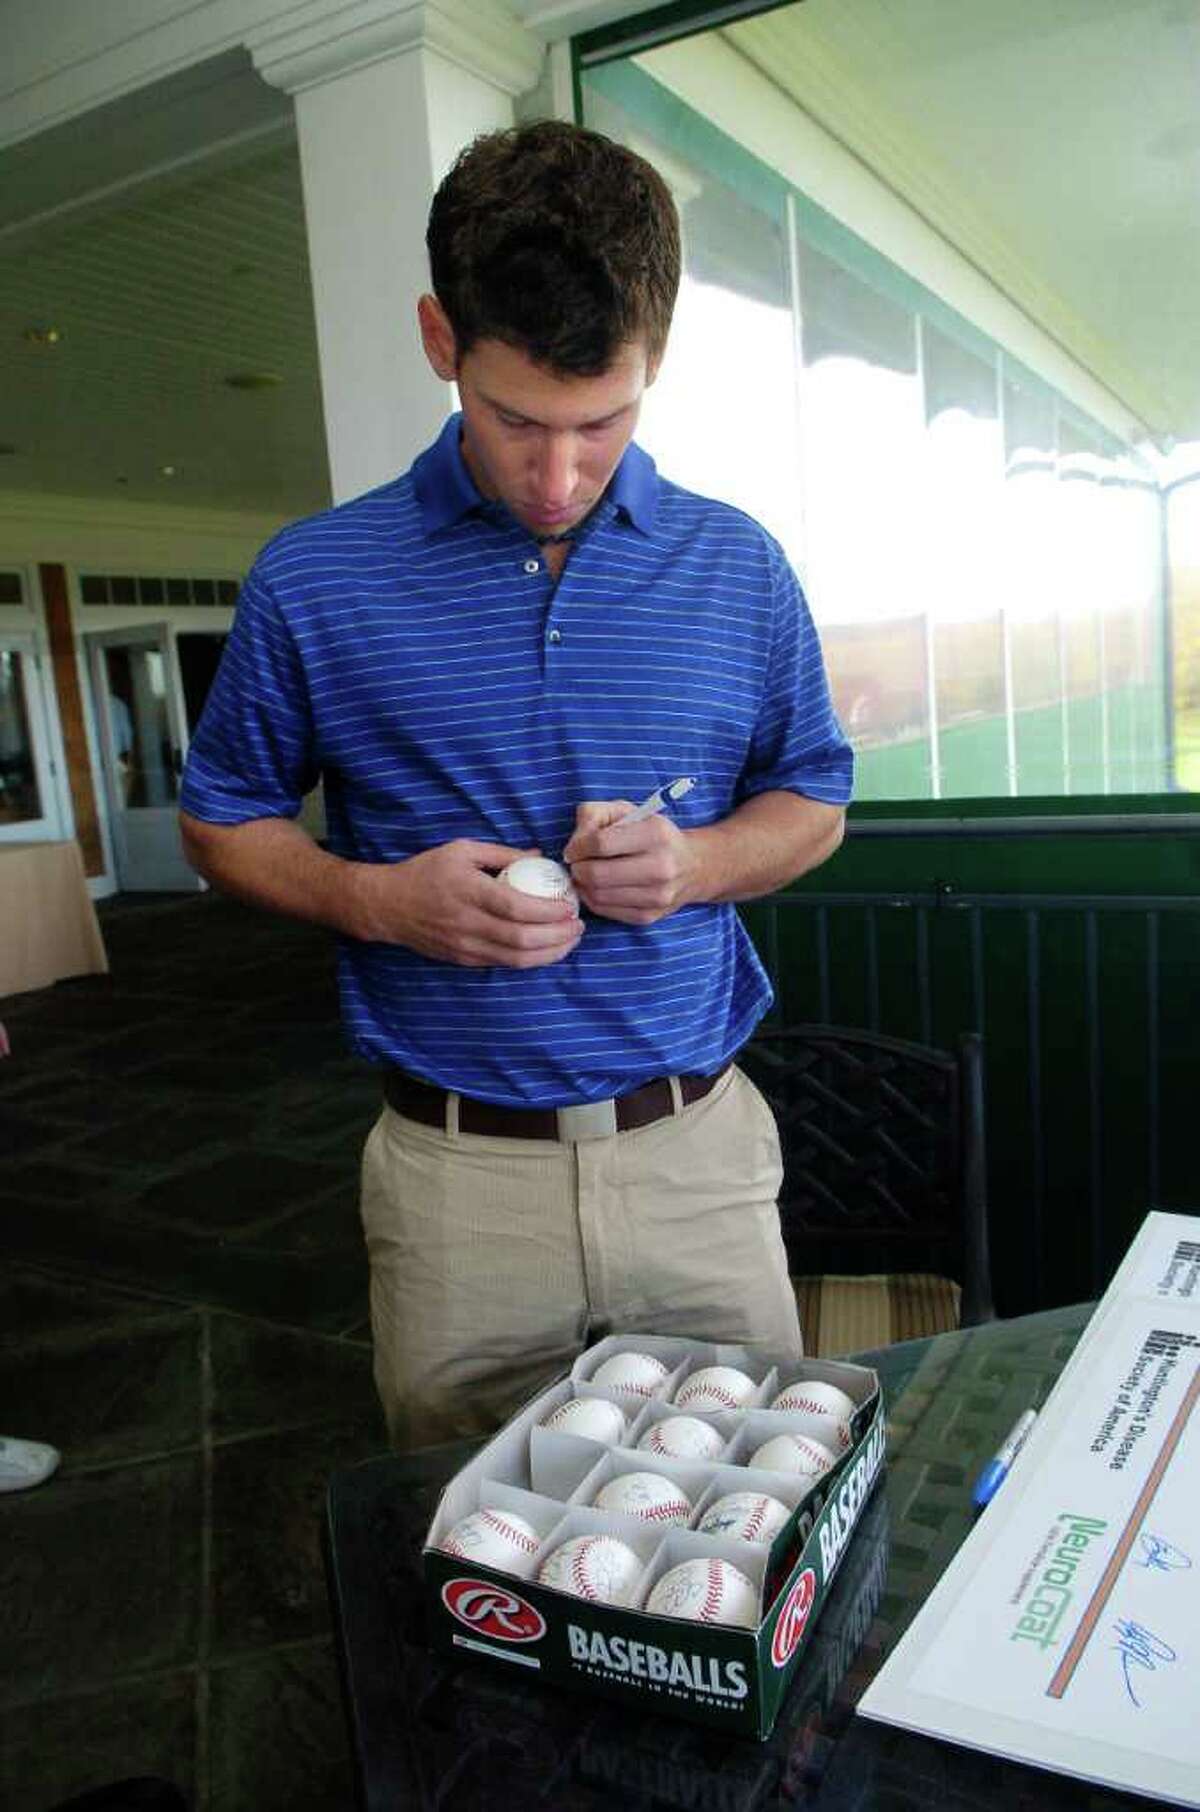 Craig Breslow signs baseballs at the annual Tim Teufel Charity Golf tournament at Tamarack Country Club in Greenwich, Conn. on Thursday October 28, 2010.